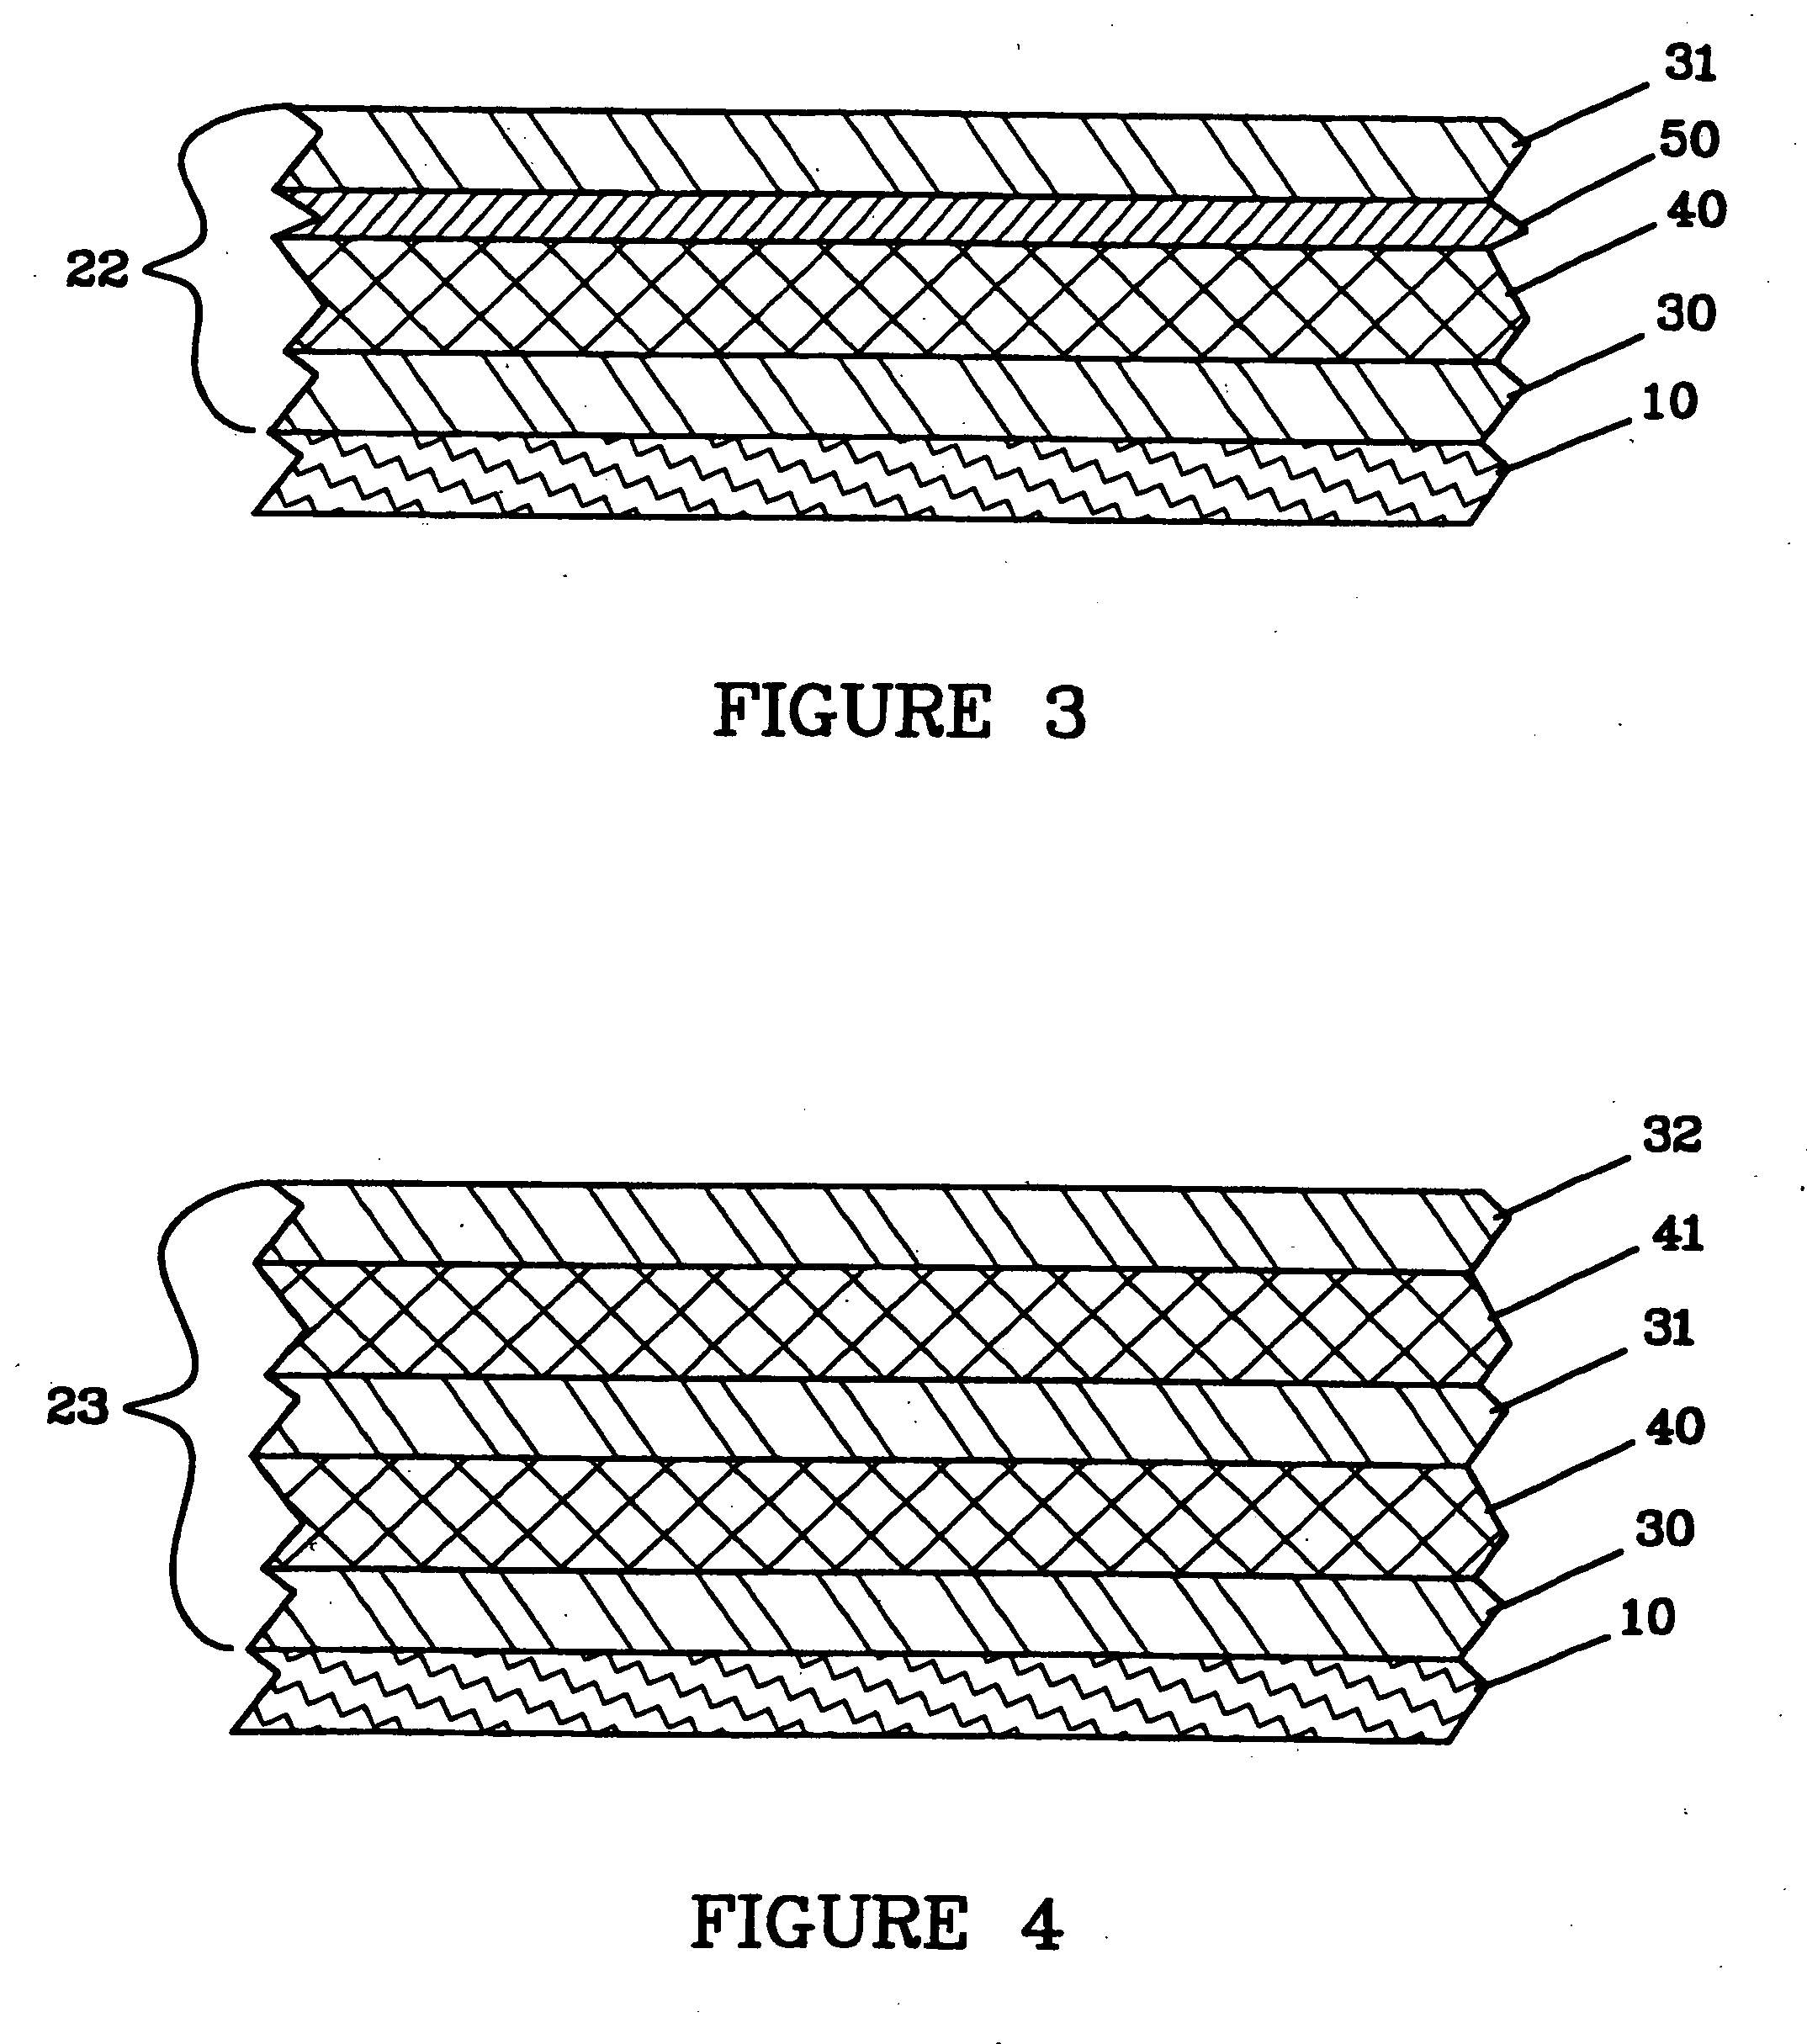 Lithium anodes for electrochemical cells